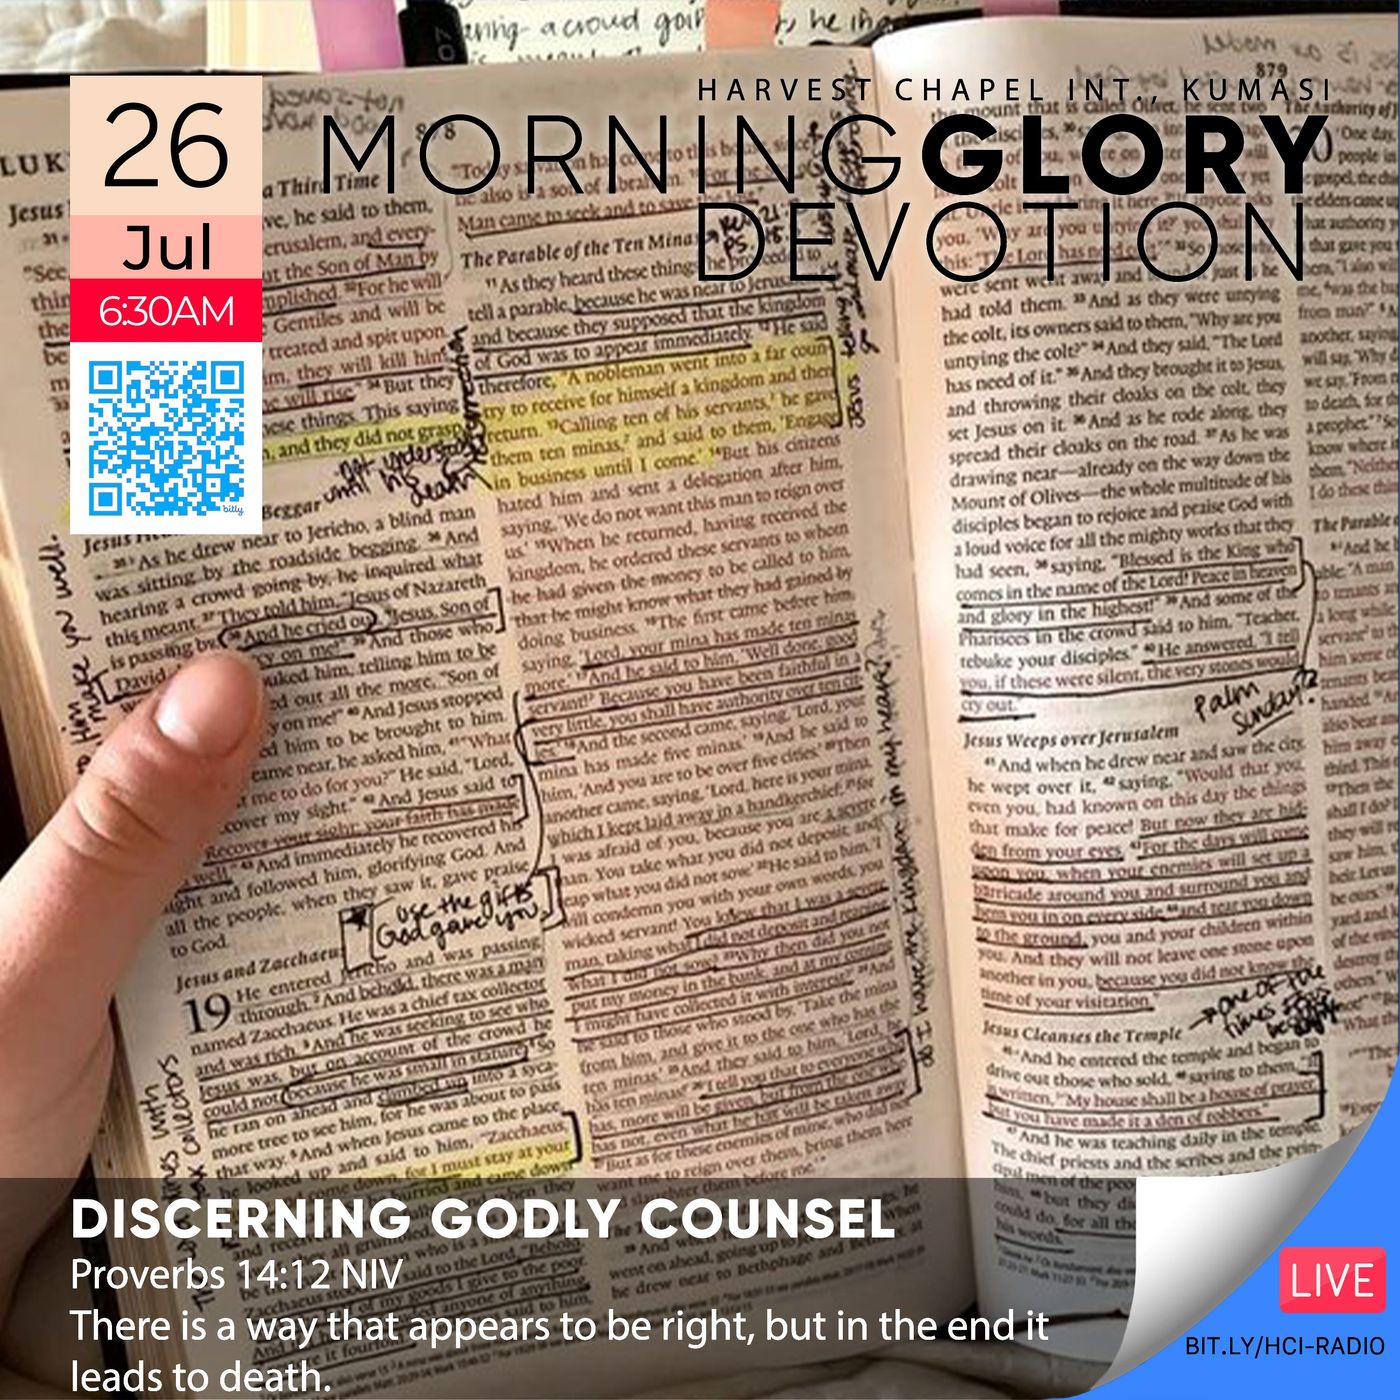 MGD: Discerning Godly Counsel